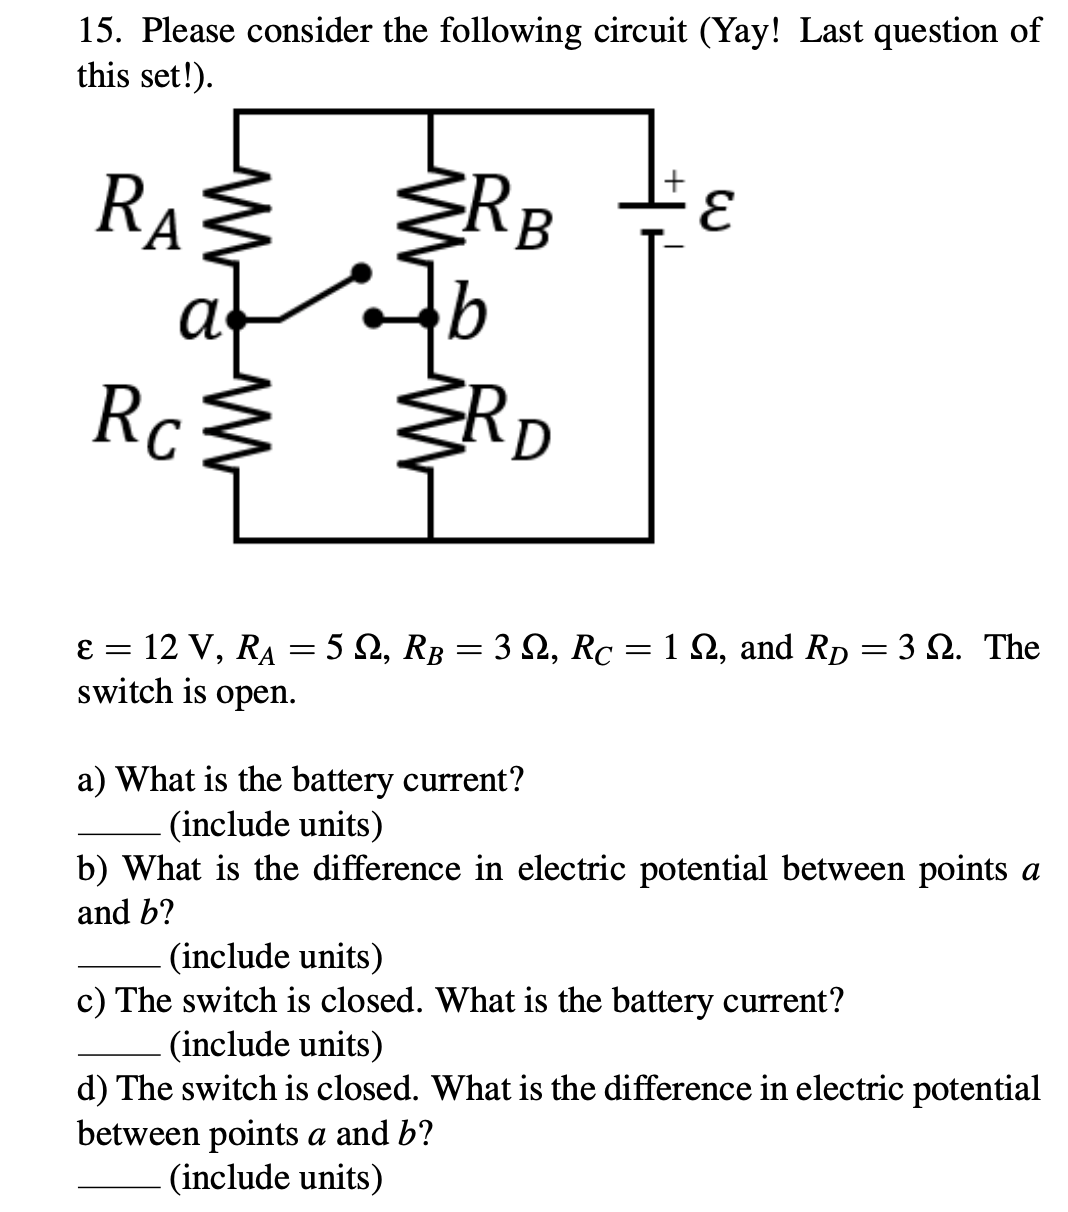 15. Please consider the following circuit (Yay! Last question of
this set!).
RA
RB
Rc
ŽRD
12 V, RA = 5 2, RB = 3 2, Rc =1 2, and Rp = 3 Q. The
switch is open.
E =
a) What is the battery current?
(include units)
b) What is the difference in electric potential between points a
and b?
(include units)
c) The switch is closed. What is the battery current?
(include units)
d) The switch is closed. What is the difference in electric potential
between points a and b?
(include units)
